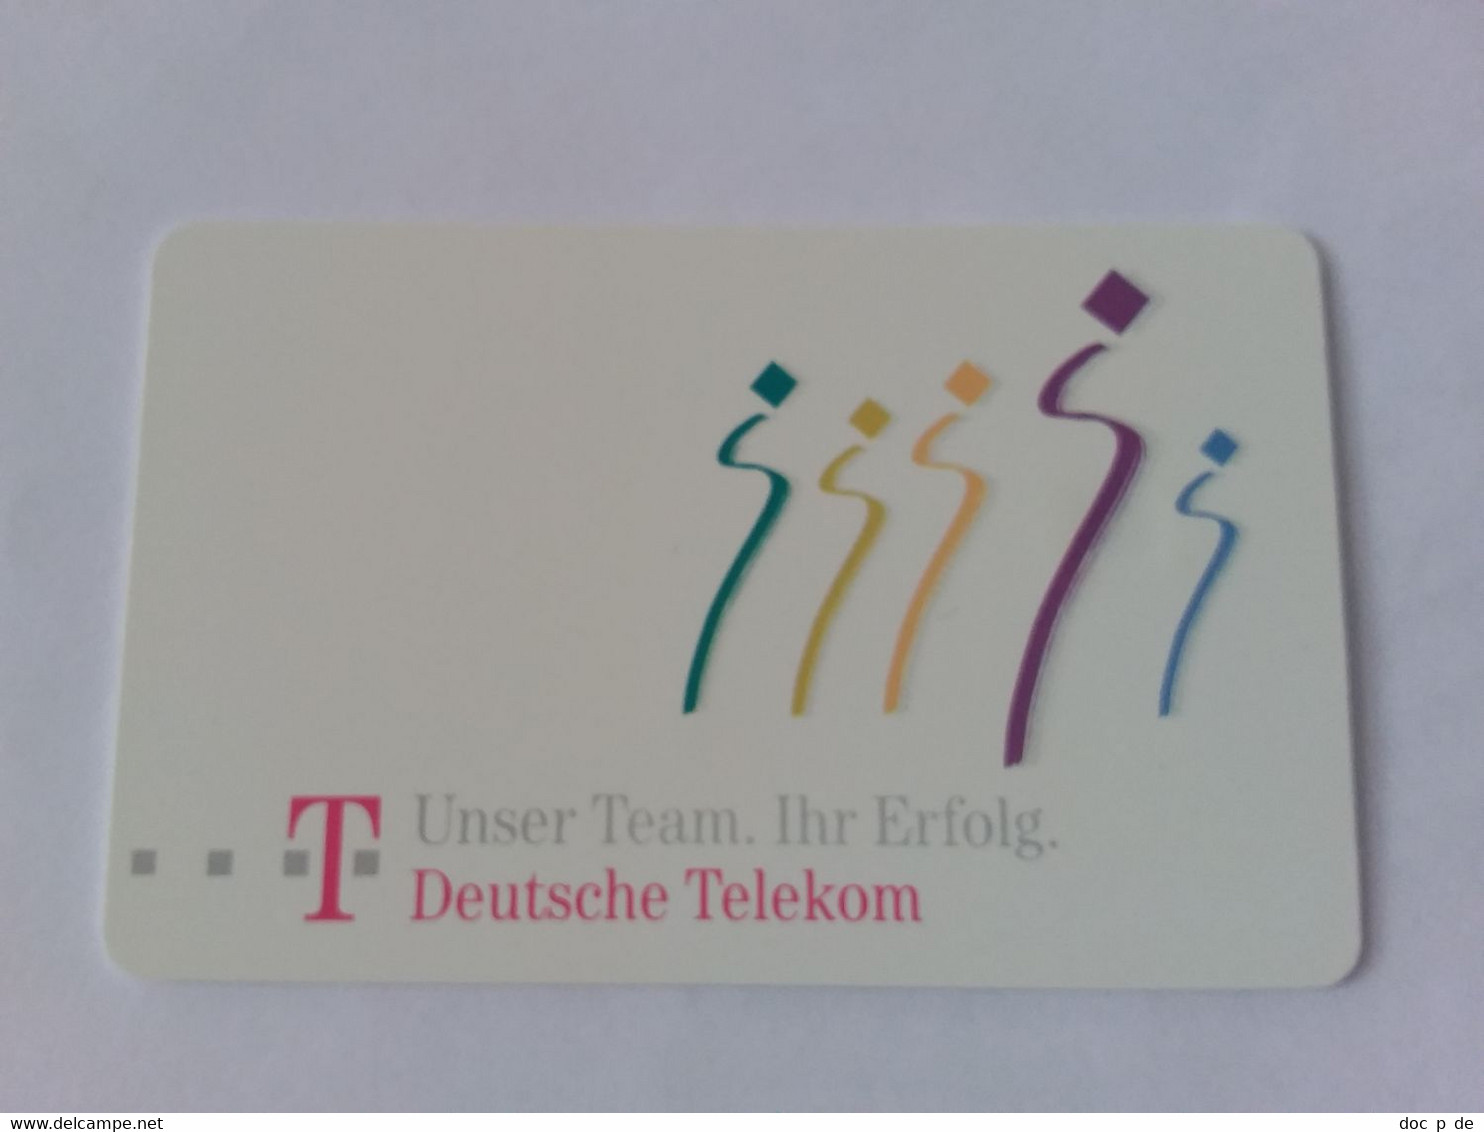 Germany  - A 06/98 Hannover CeBit 98  - Mint - A + AD-Series : D. Telekom AG Advertisement